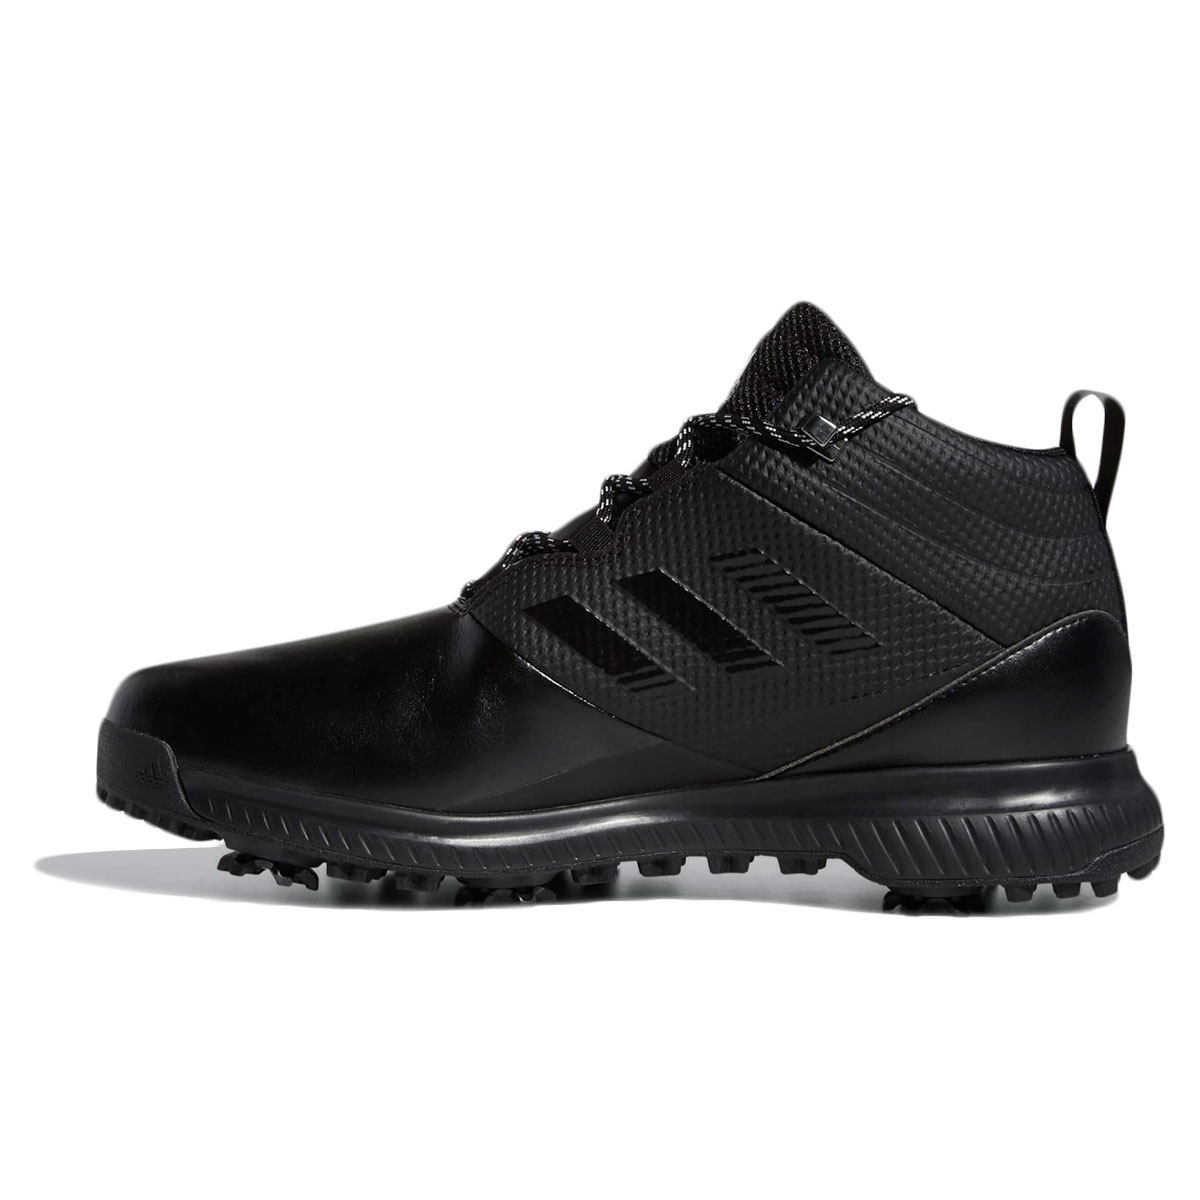 adidas golf cp traxion mid boots